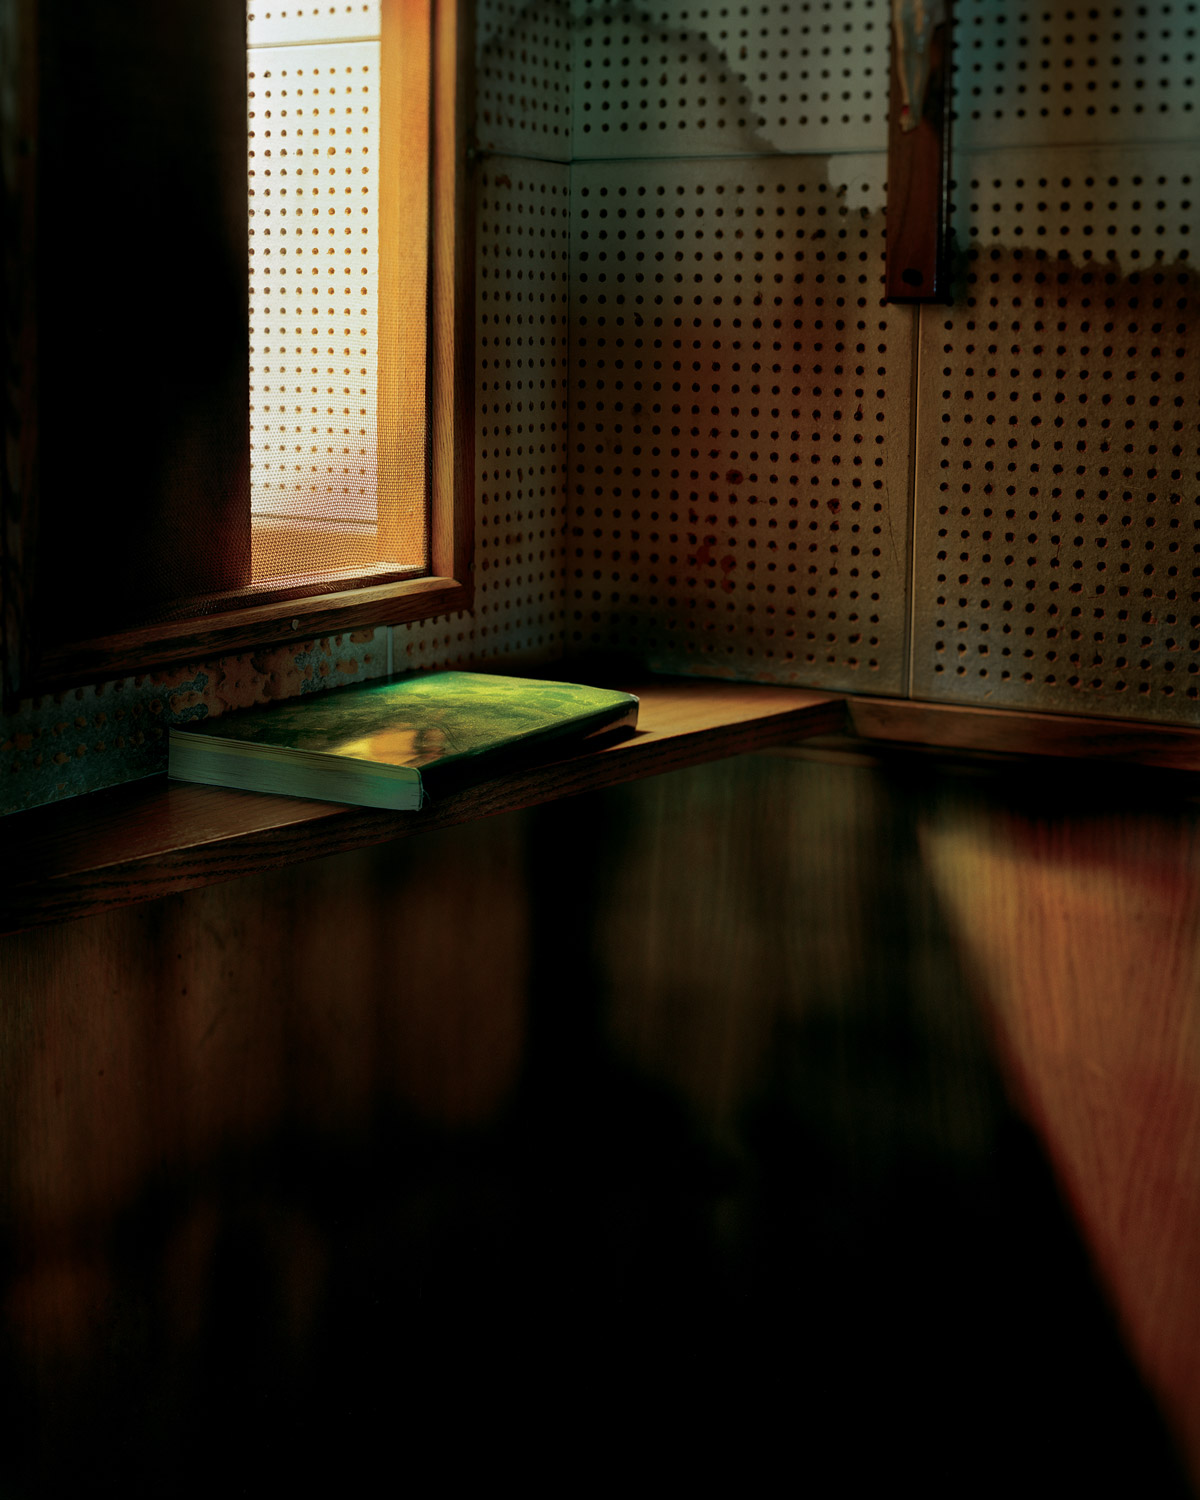 A photograph of the inside of a confessional booth, with water-stained light wood, which the artist associates with Saint Christopher.